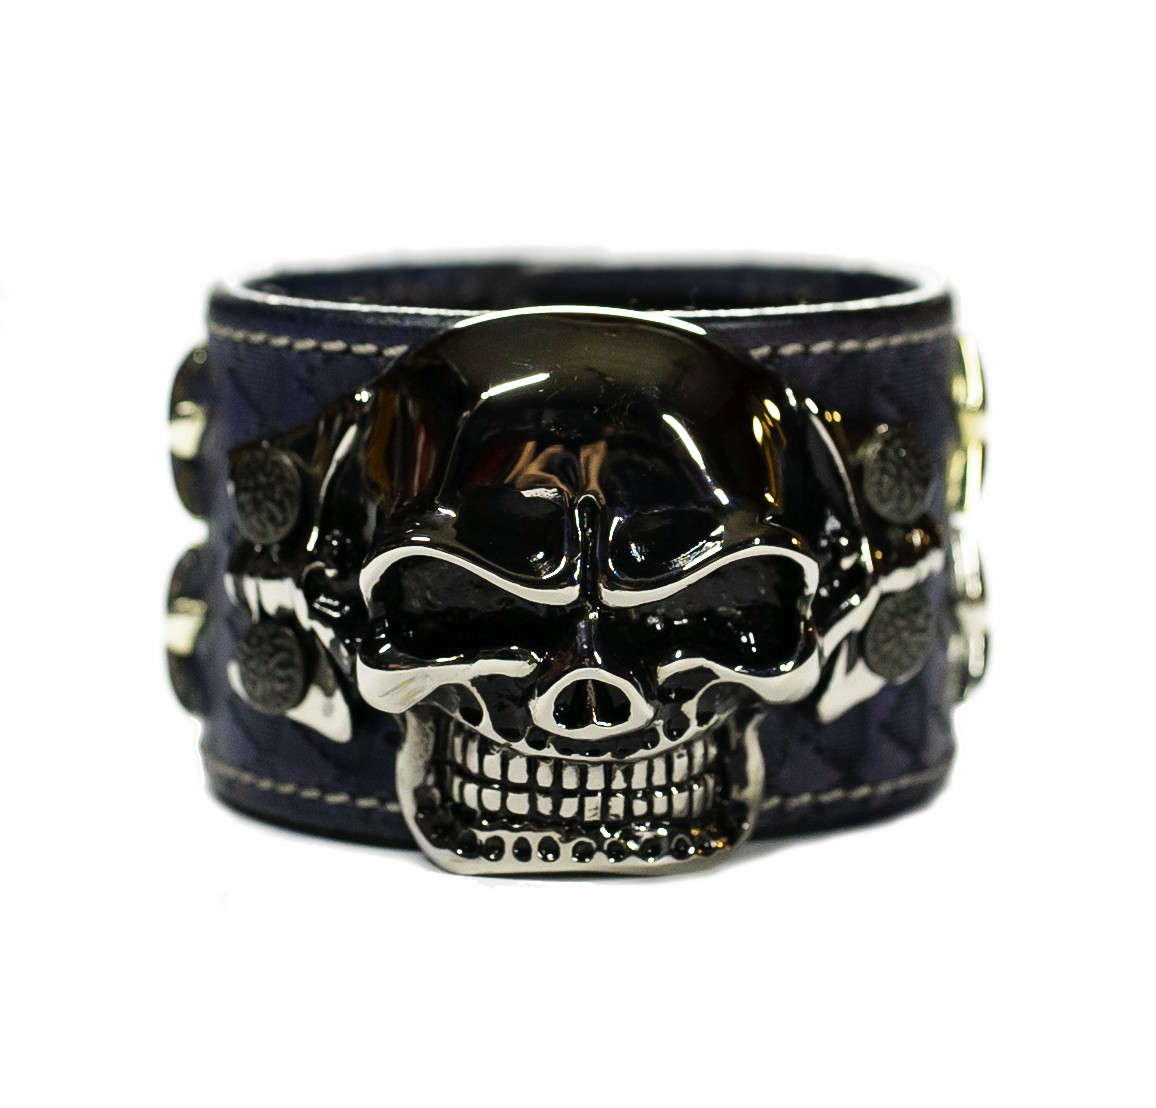 The Big Skull Navy Leather Cuff front